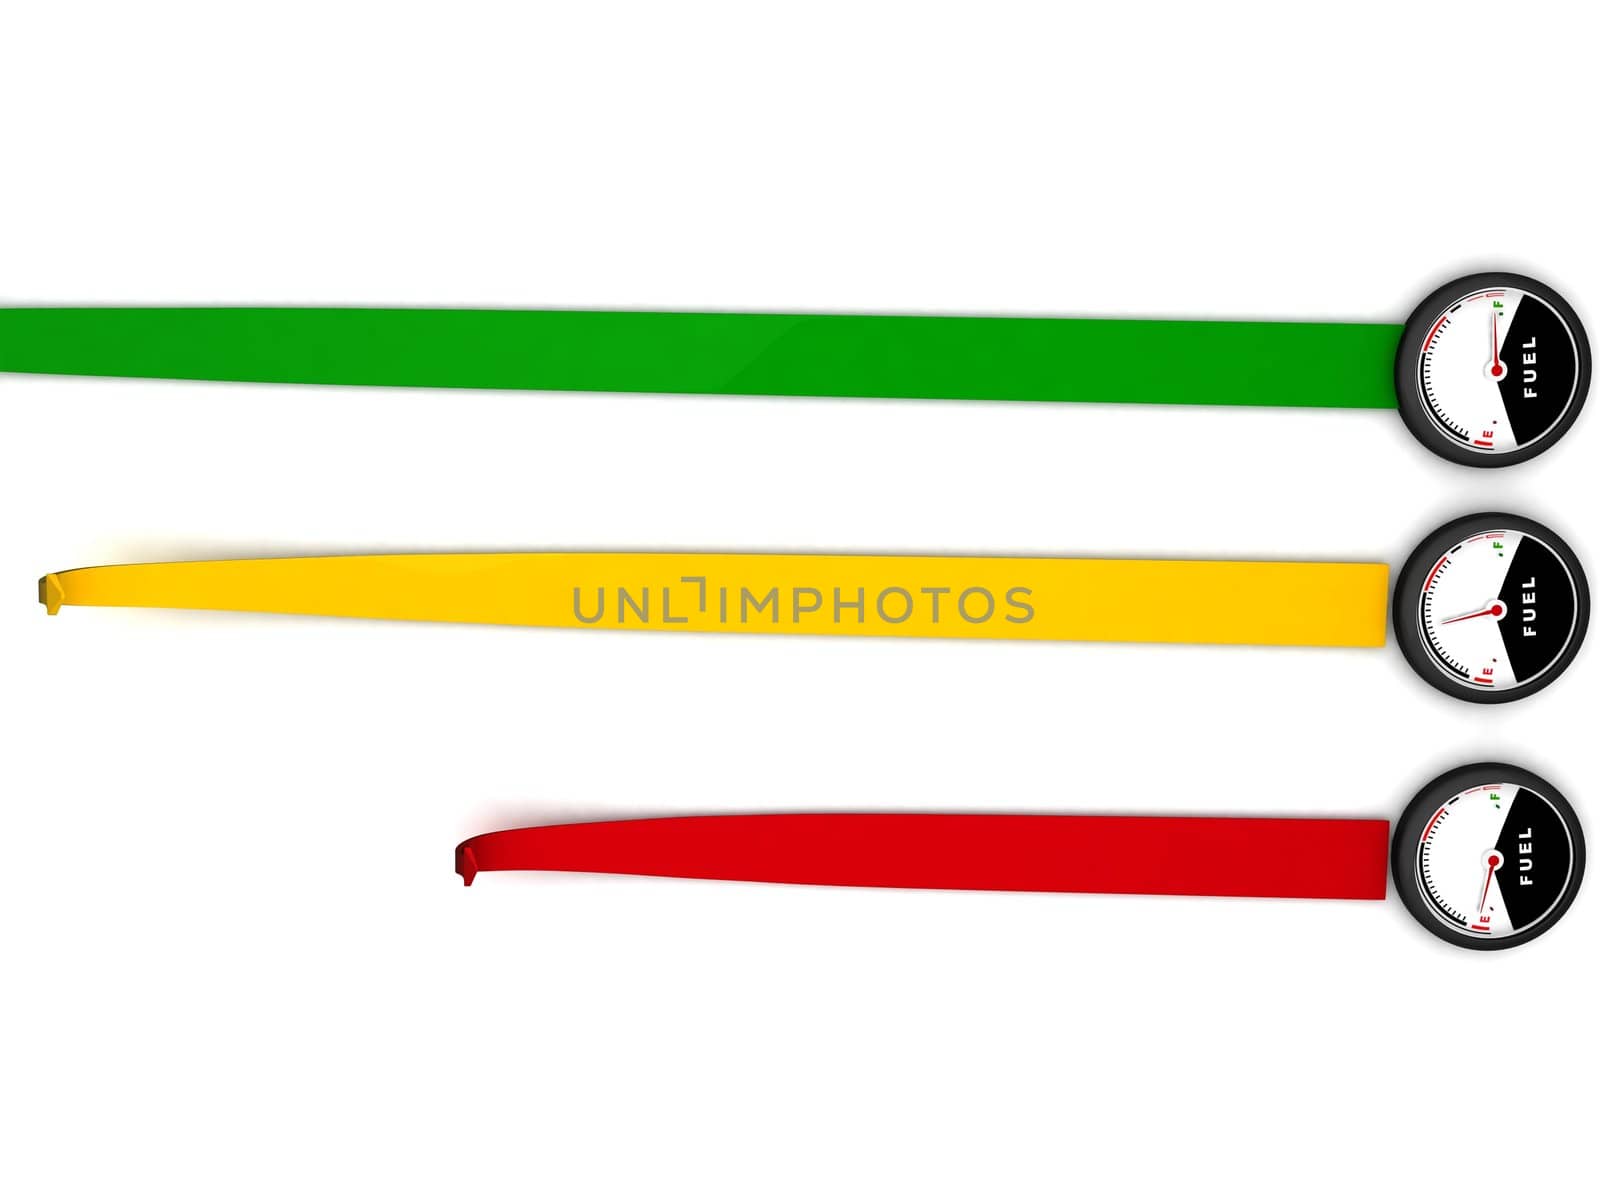 three dimensional view of rendered fuel meters with colorful strips